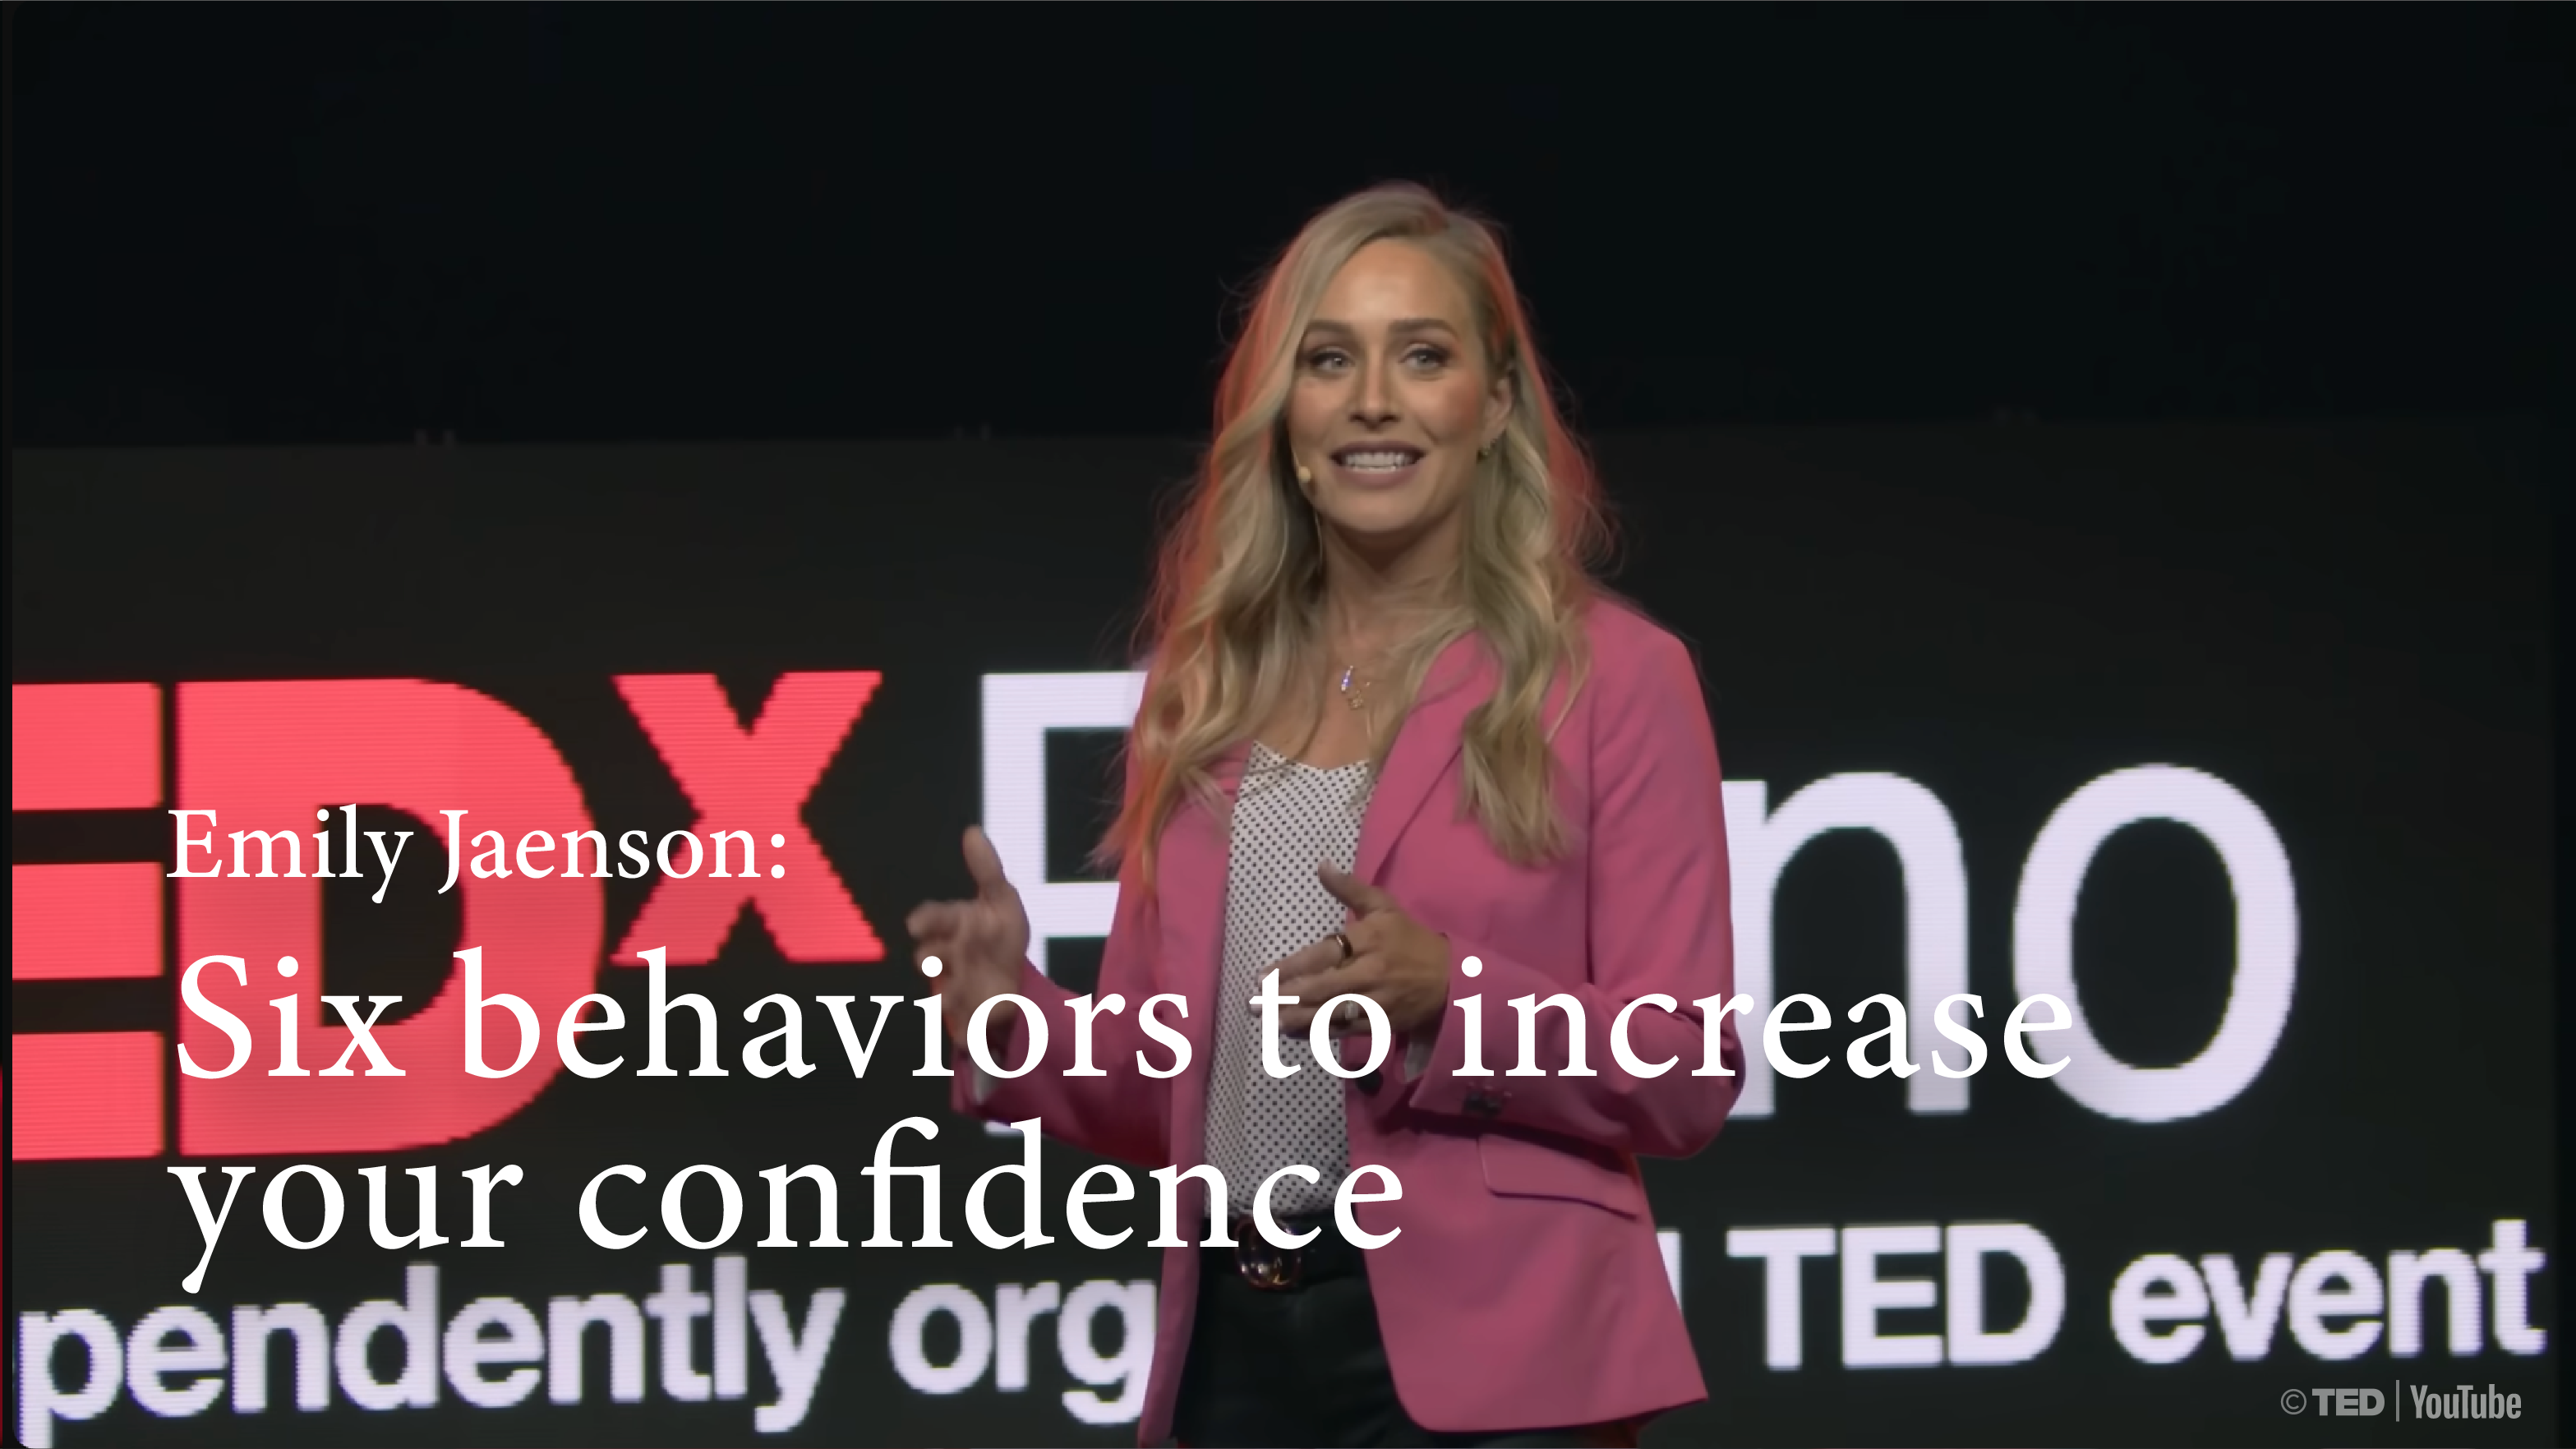 [A] Six behaviors to increase your confidence | Emily Jaenson [FULL]